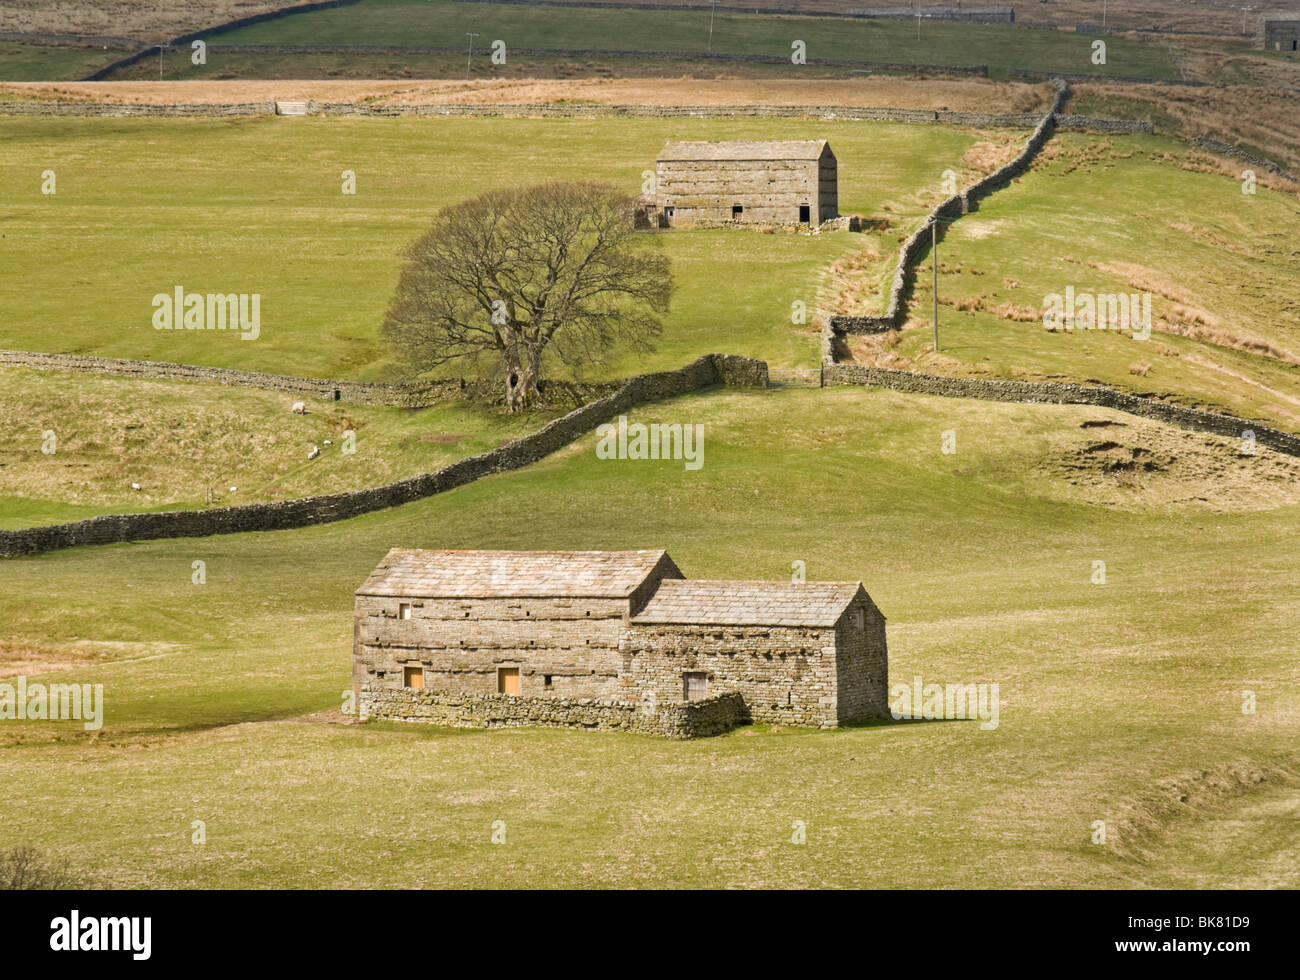 Barns and walls in Upper swaledale, North Yorkshire. Stock Photo